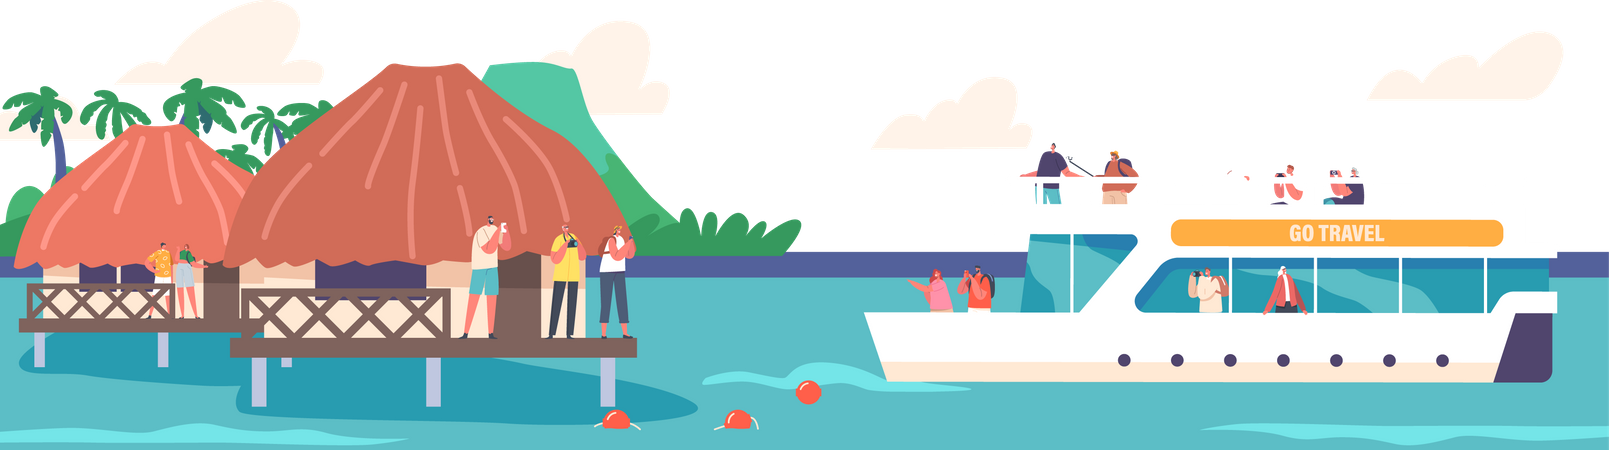 Tourists Spend Time Or Ship Illustration